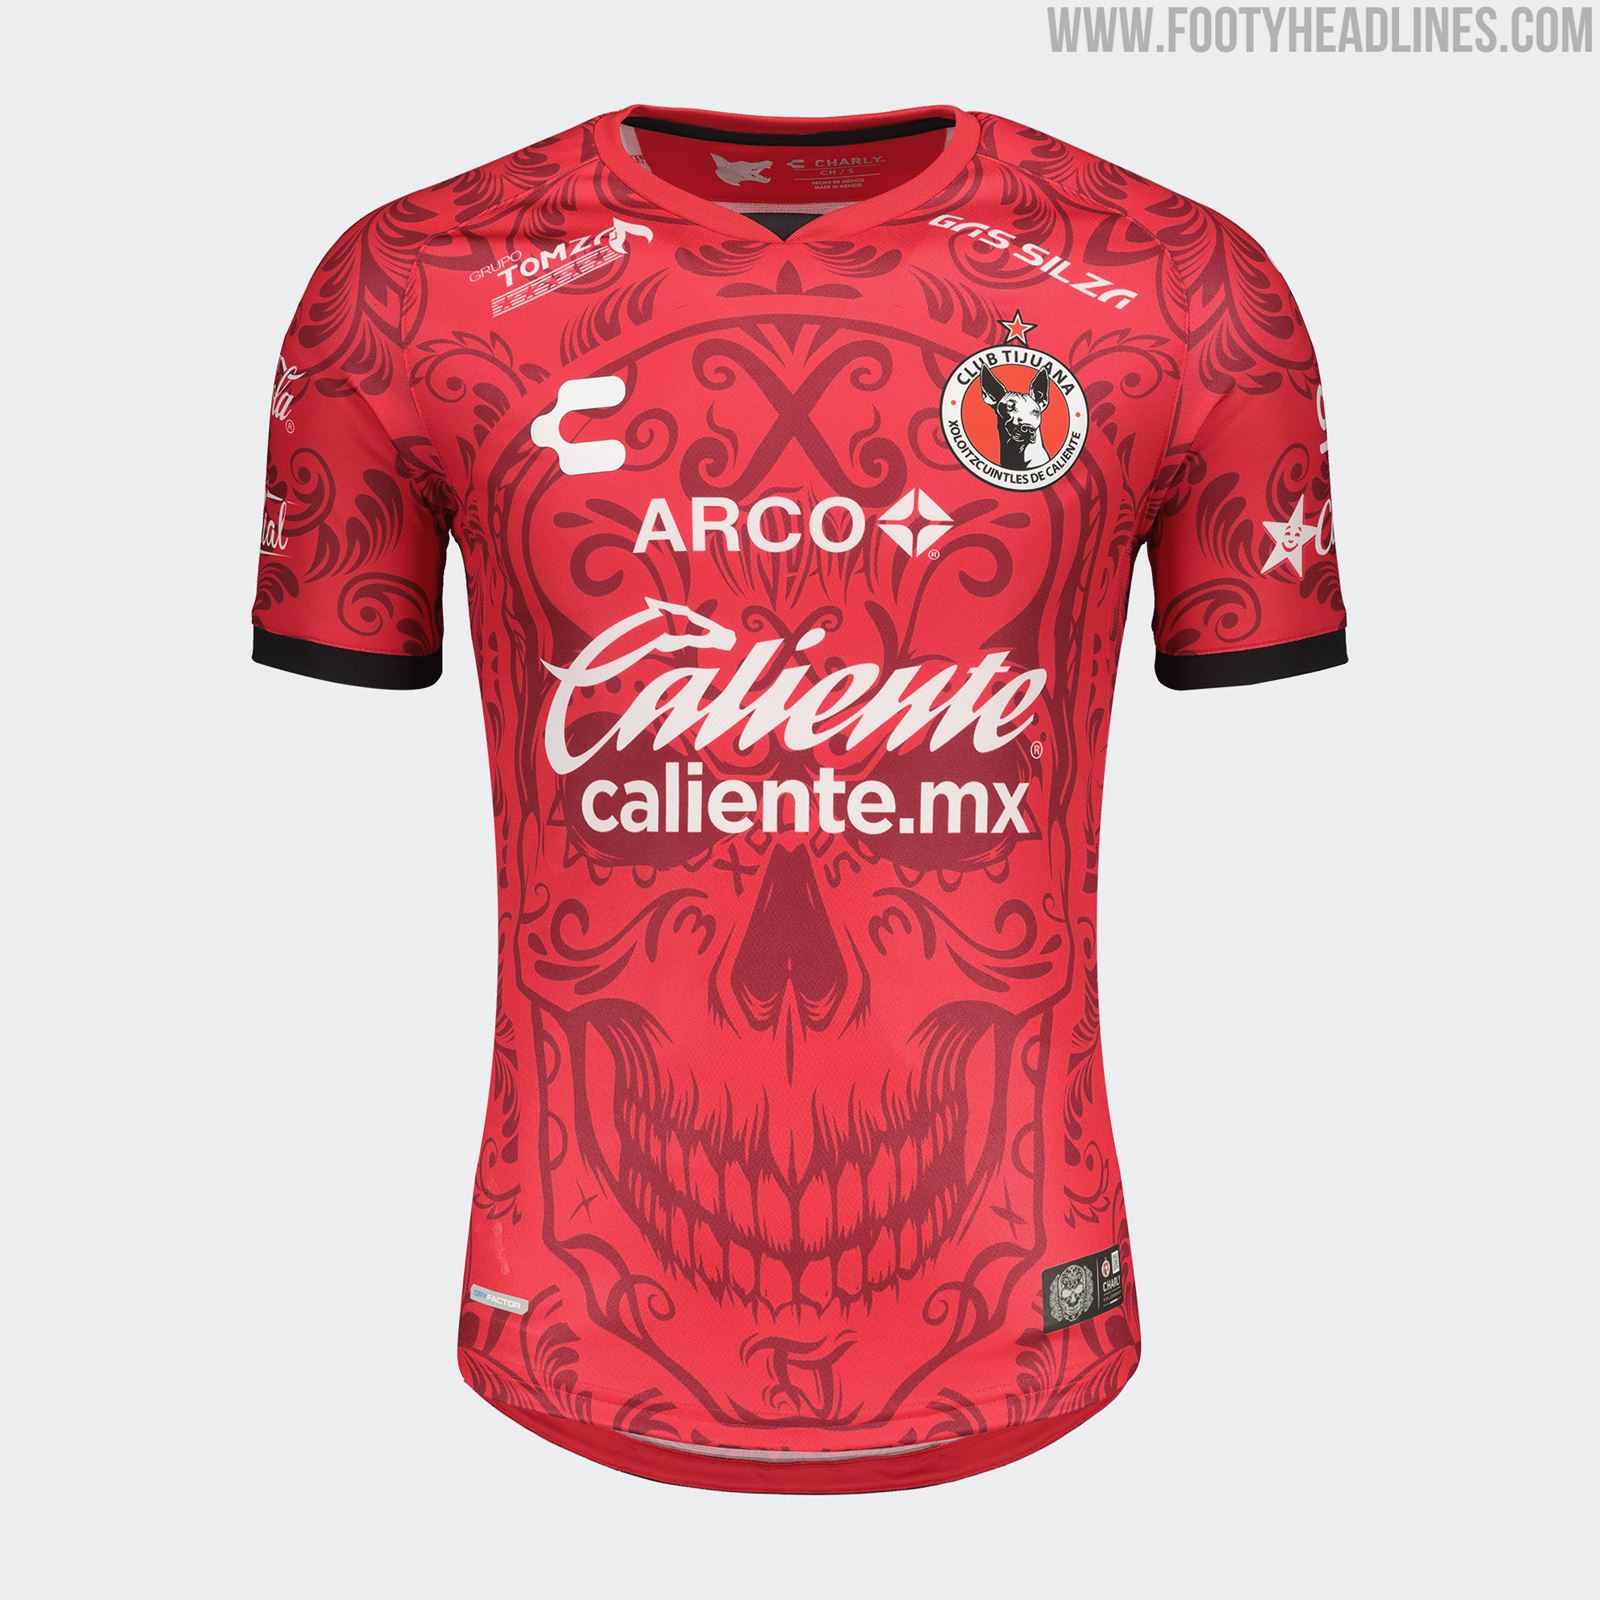 Mexico's Day of the Dead: Liga MX clubs unveil stunning new kits - ESPN